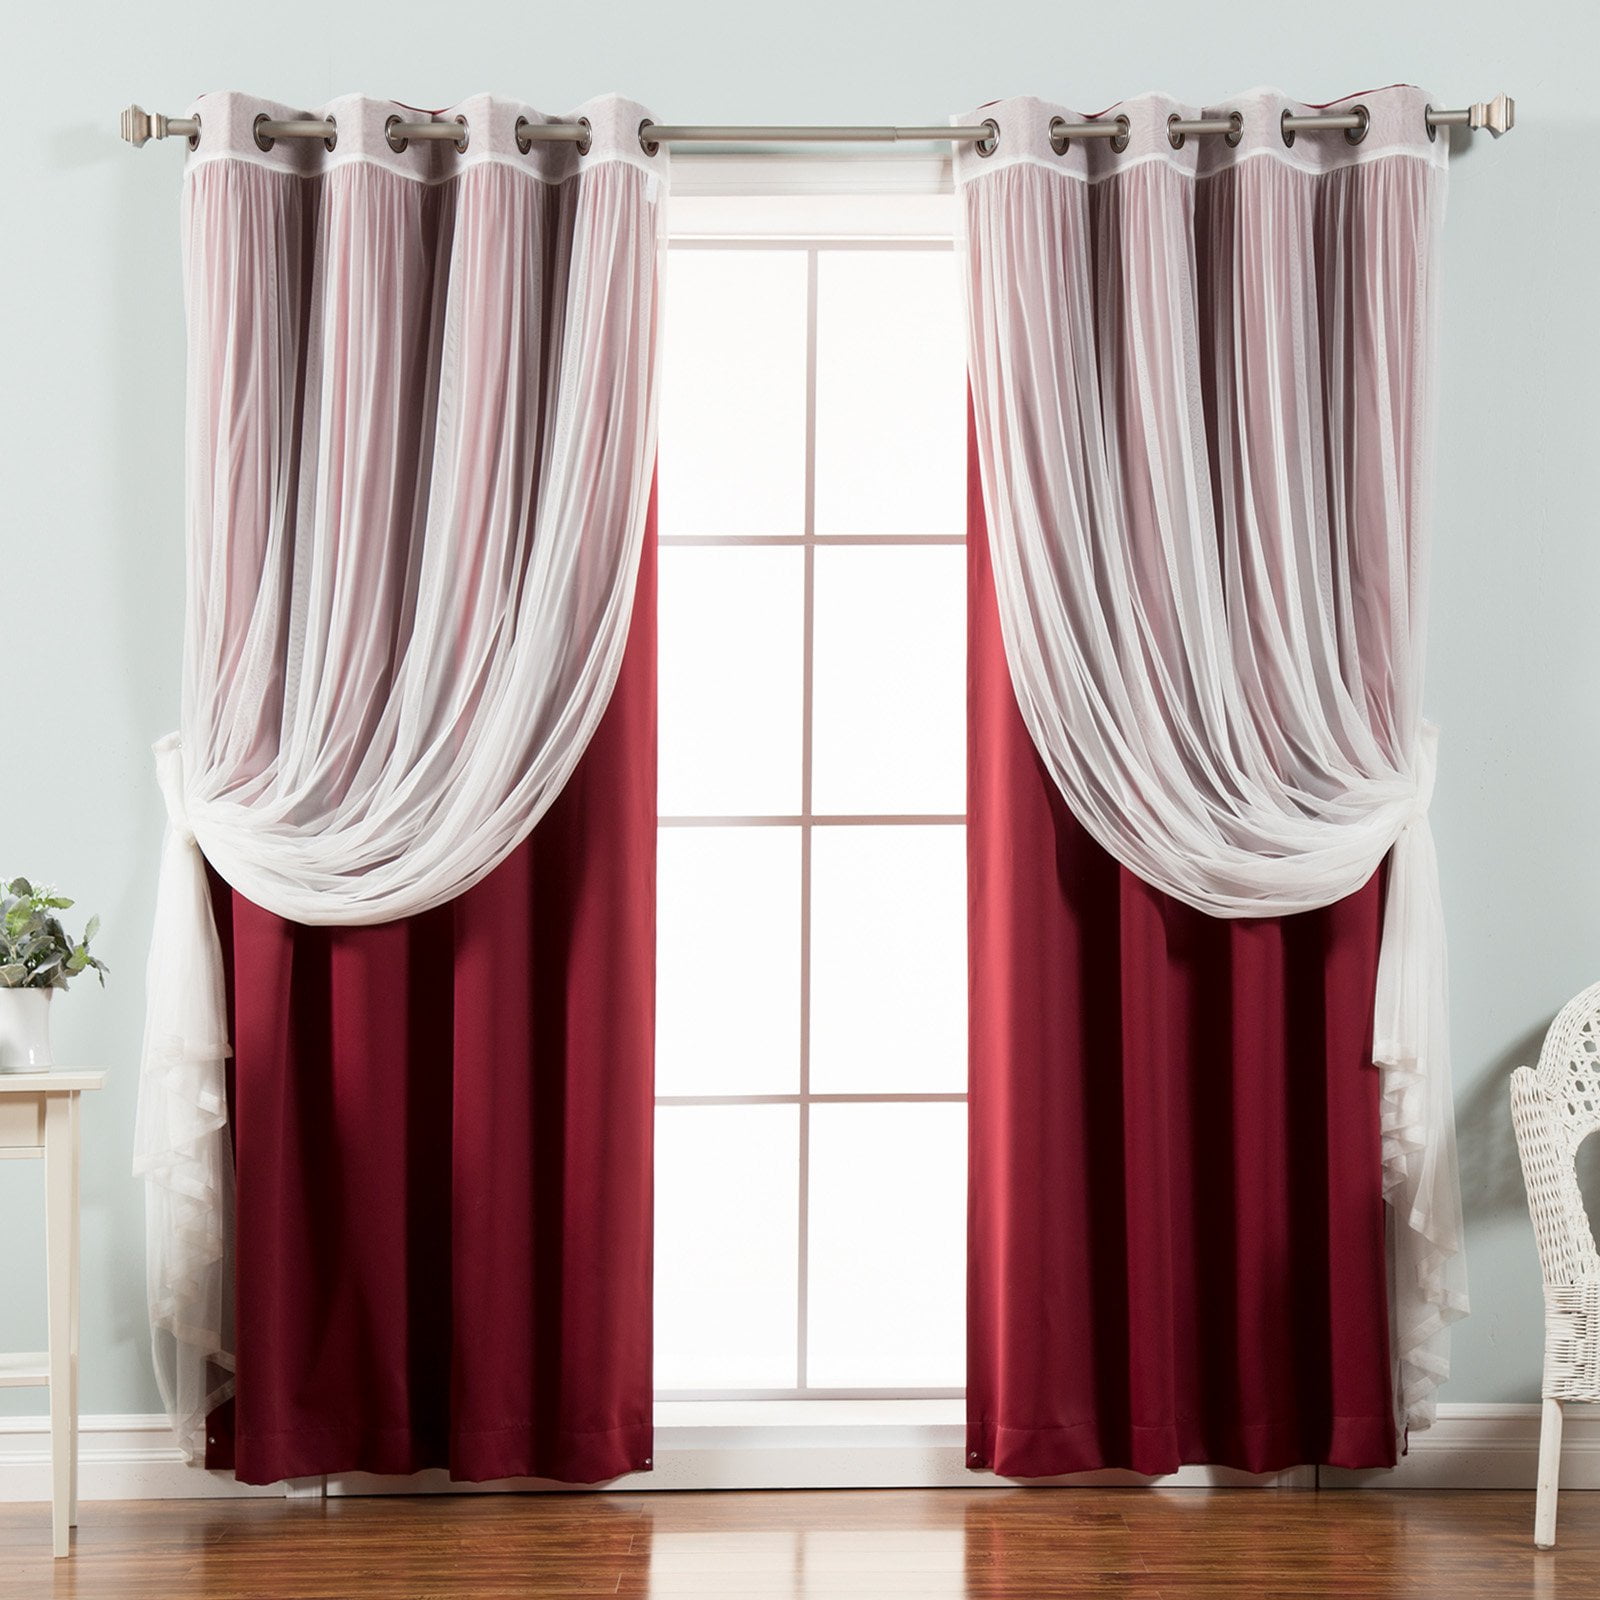 Aurora Home Mix And Match Blackout Tulle Lace Sheer 4 Piece Curtain Panel Set 